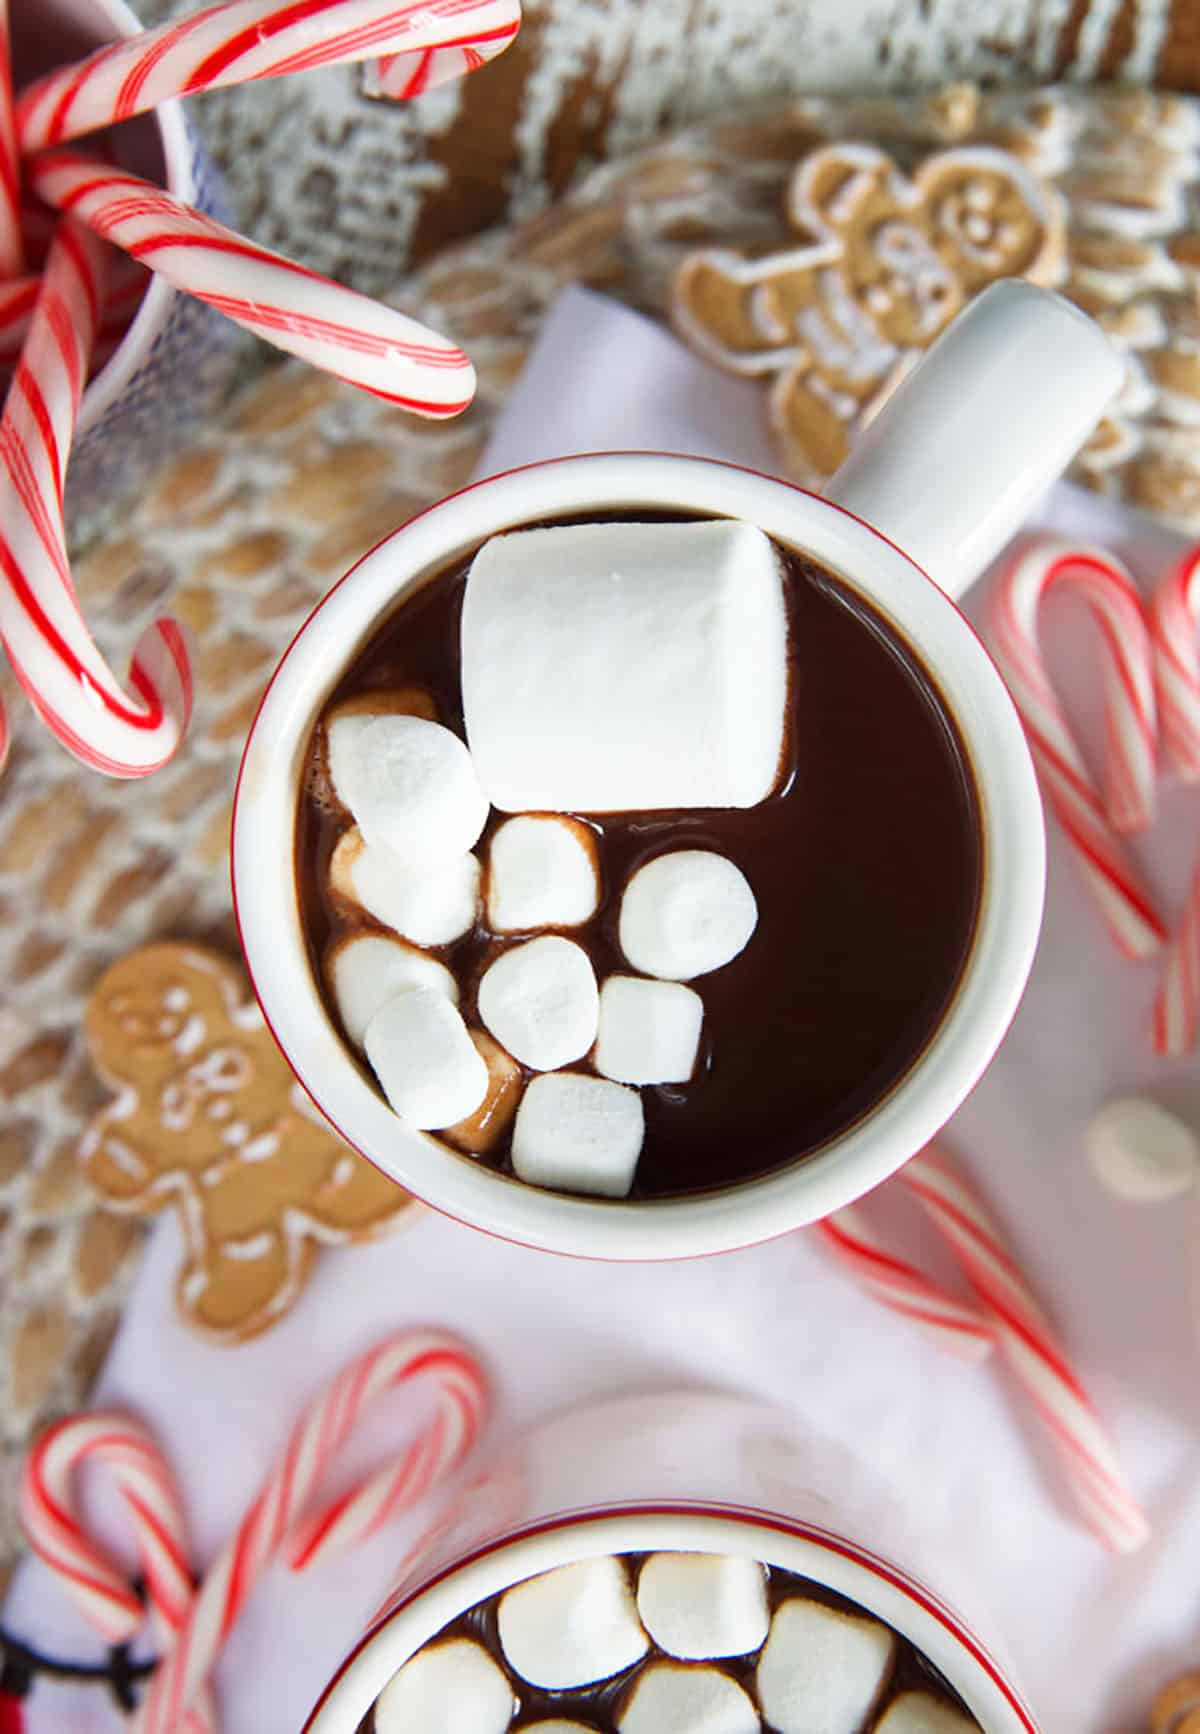 Several large and mini marshmallows are placed in a full mug of hot chocolate. 